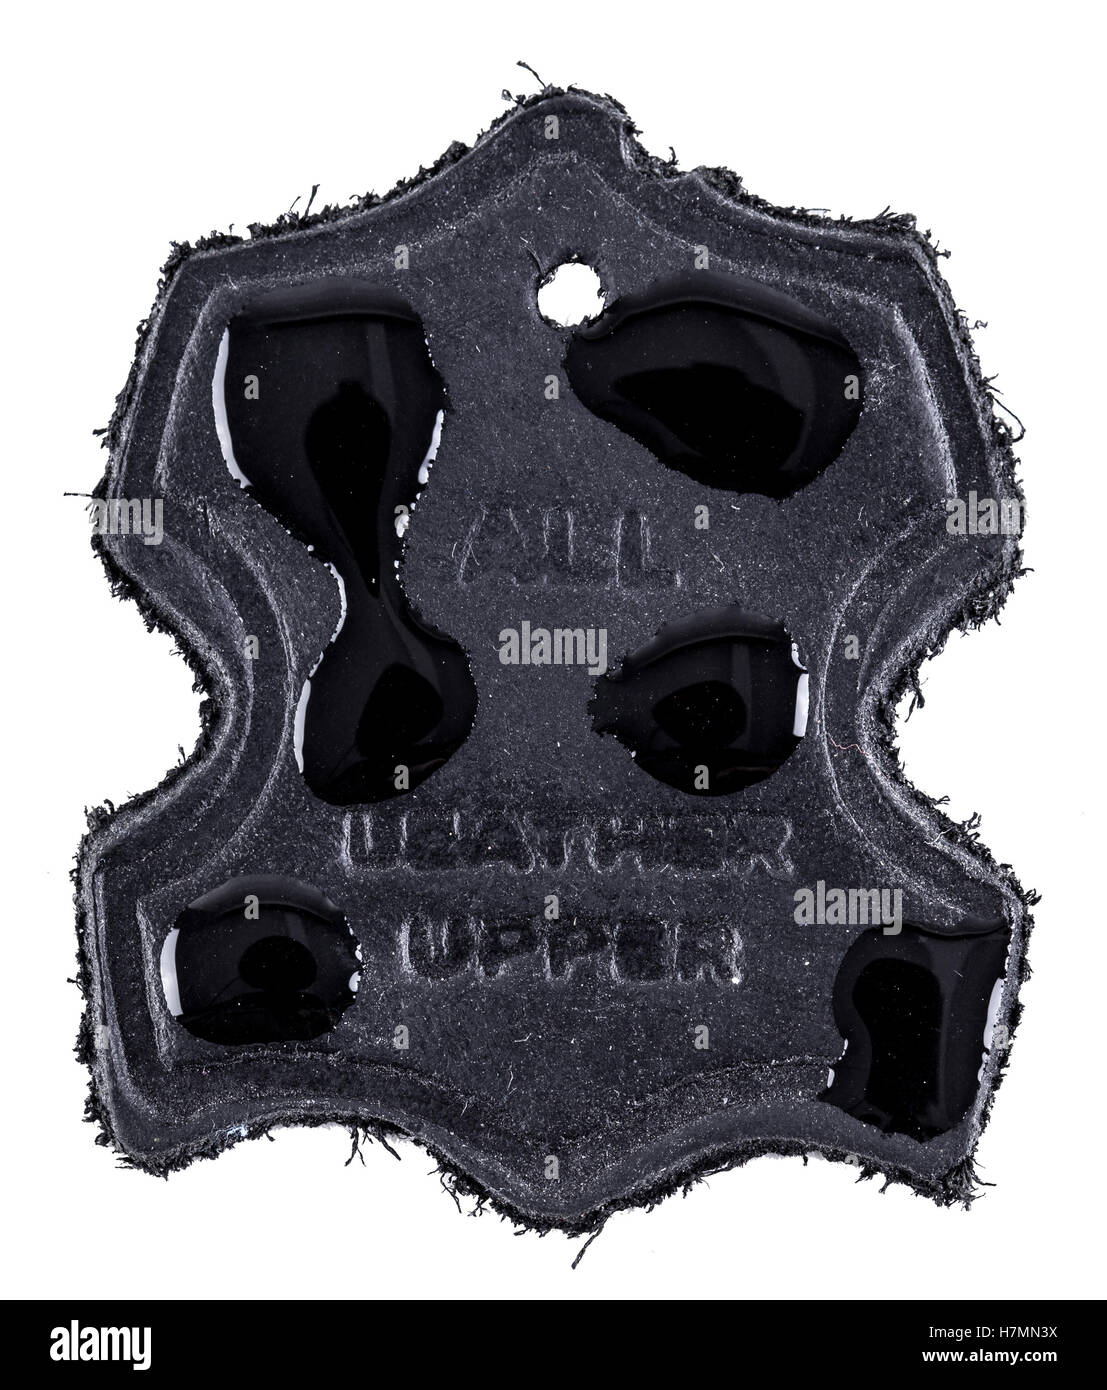 Real leather label in black with water drops on to show water resistance. Isolated on a white background Stock Photo